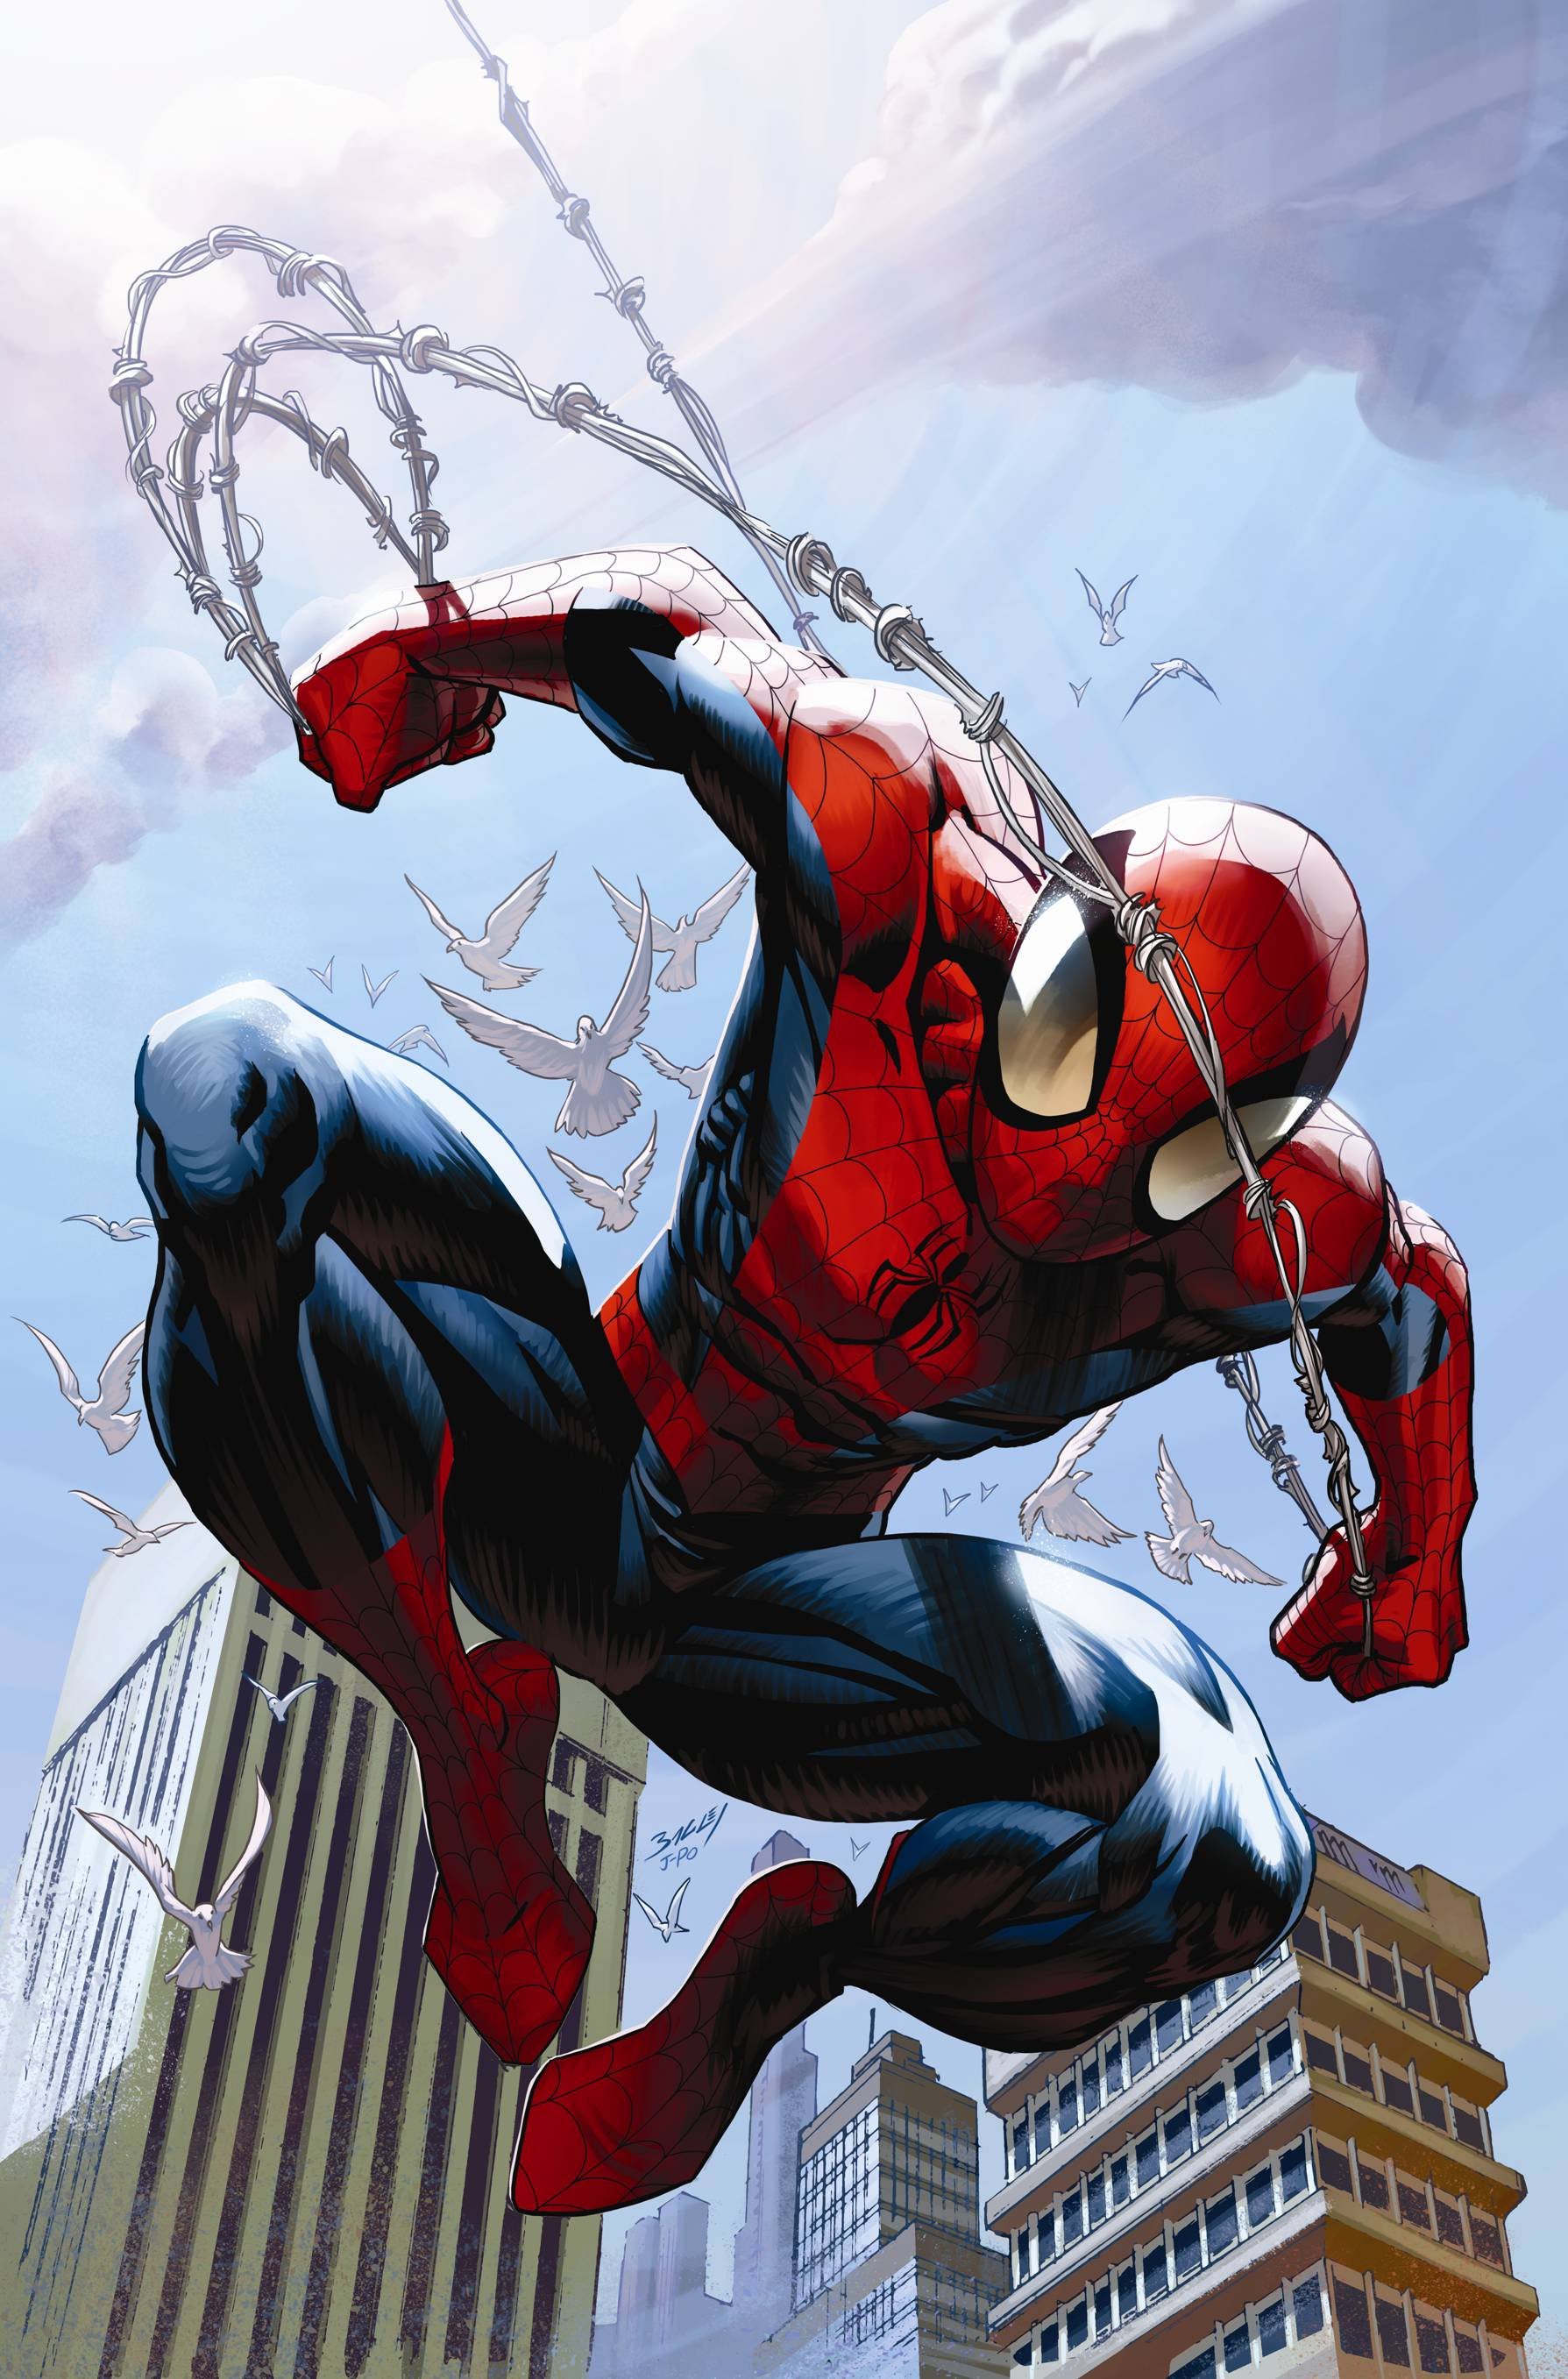 What happened to Earth 1610 Spider-Man?